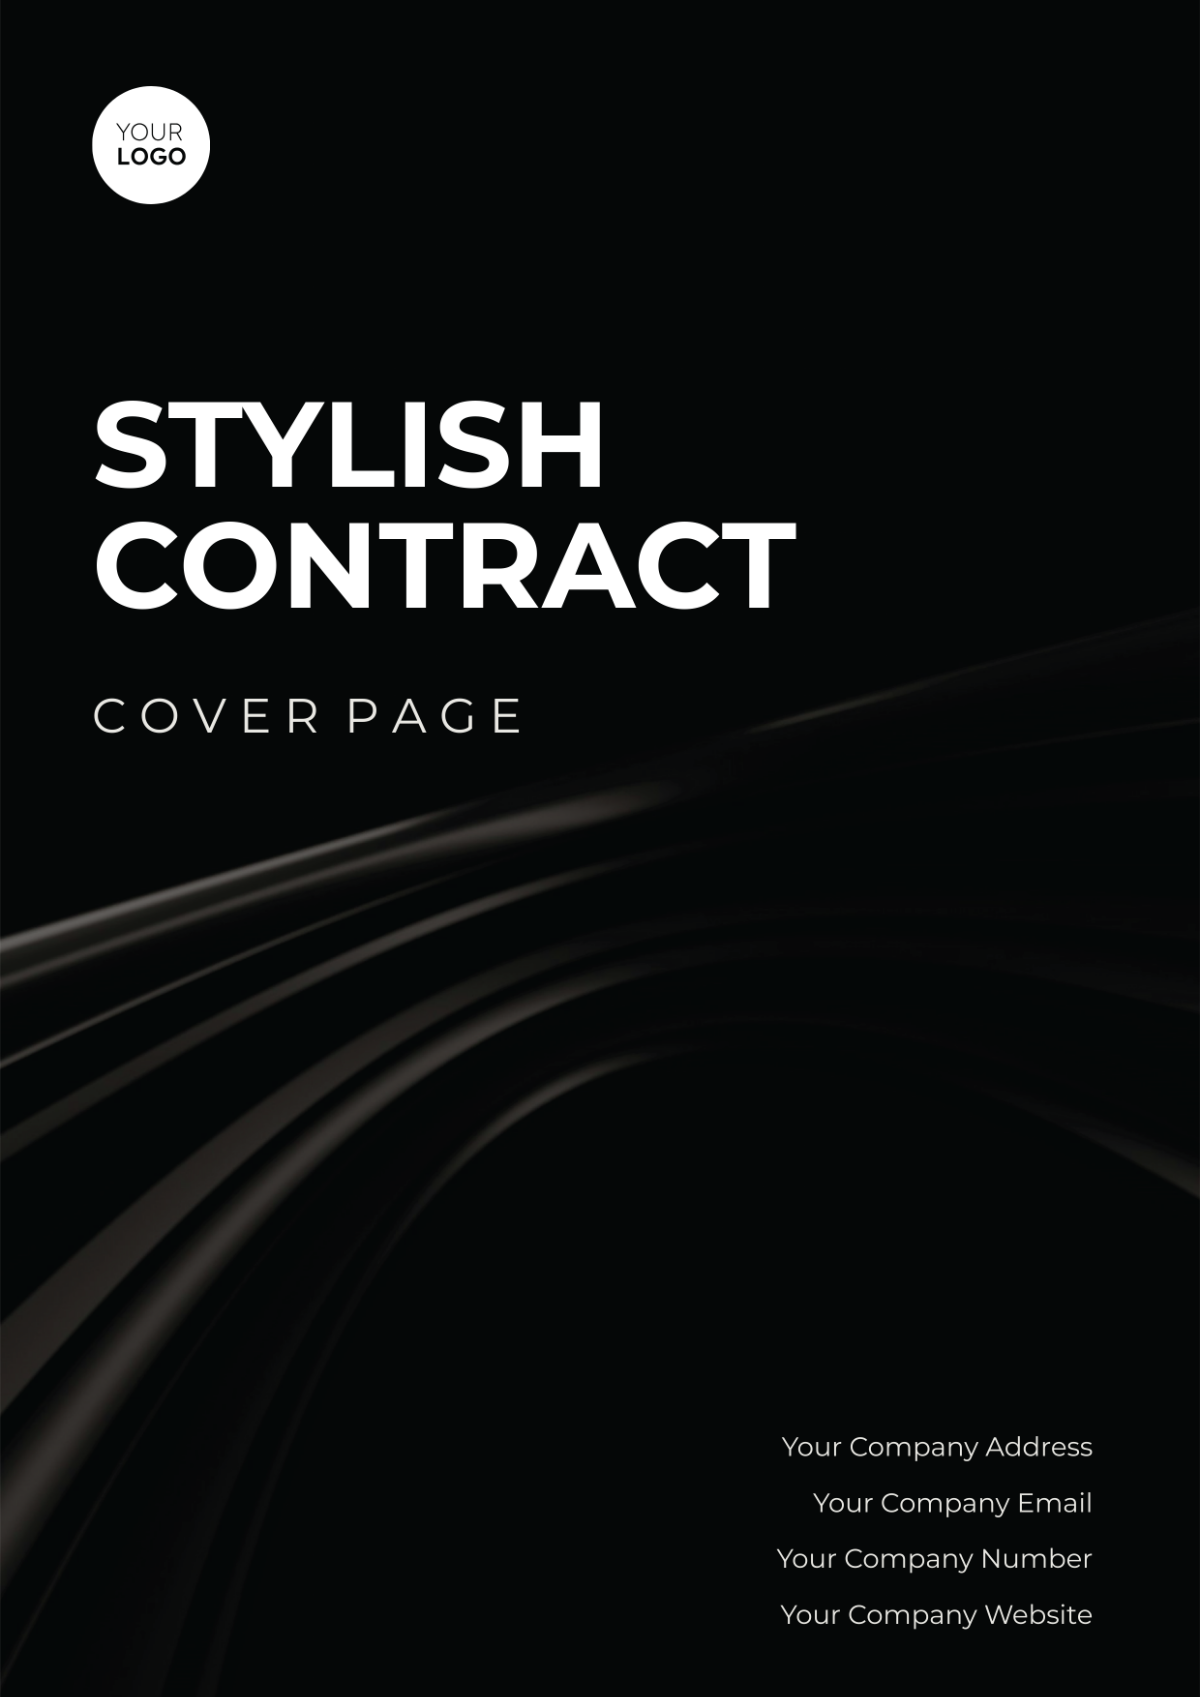 Stylish Contract Cover Page